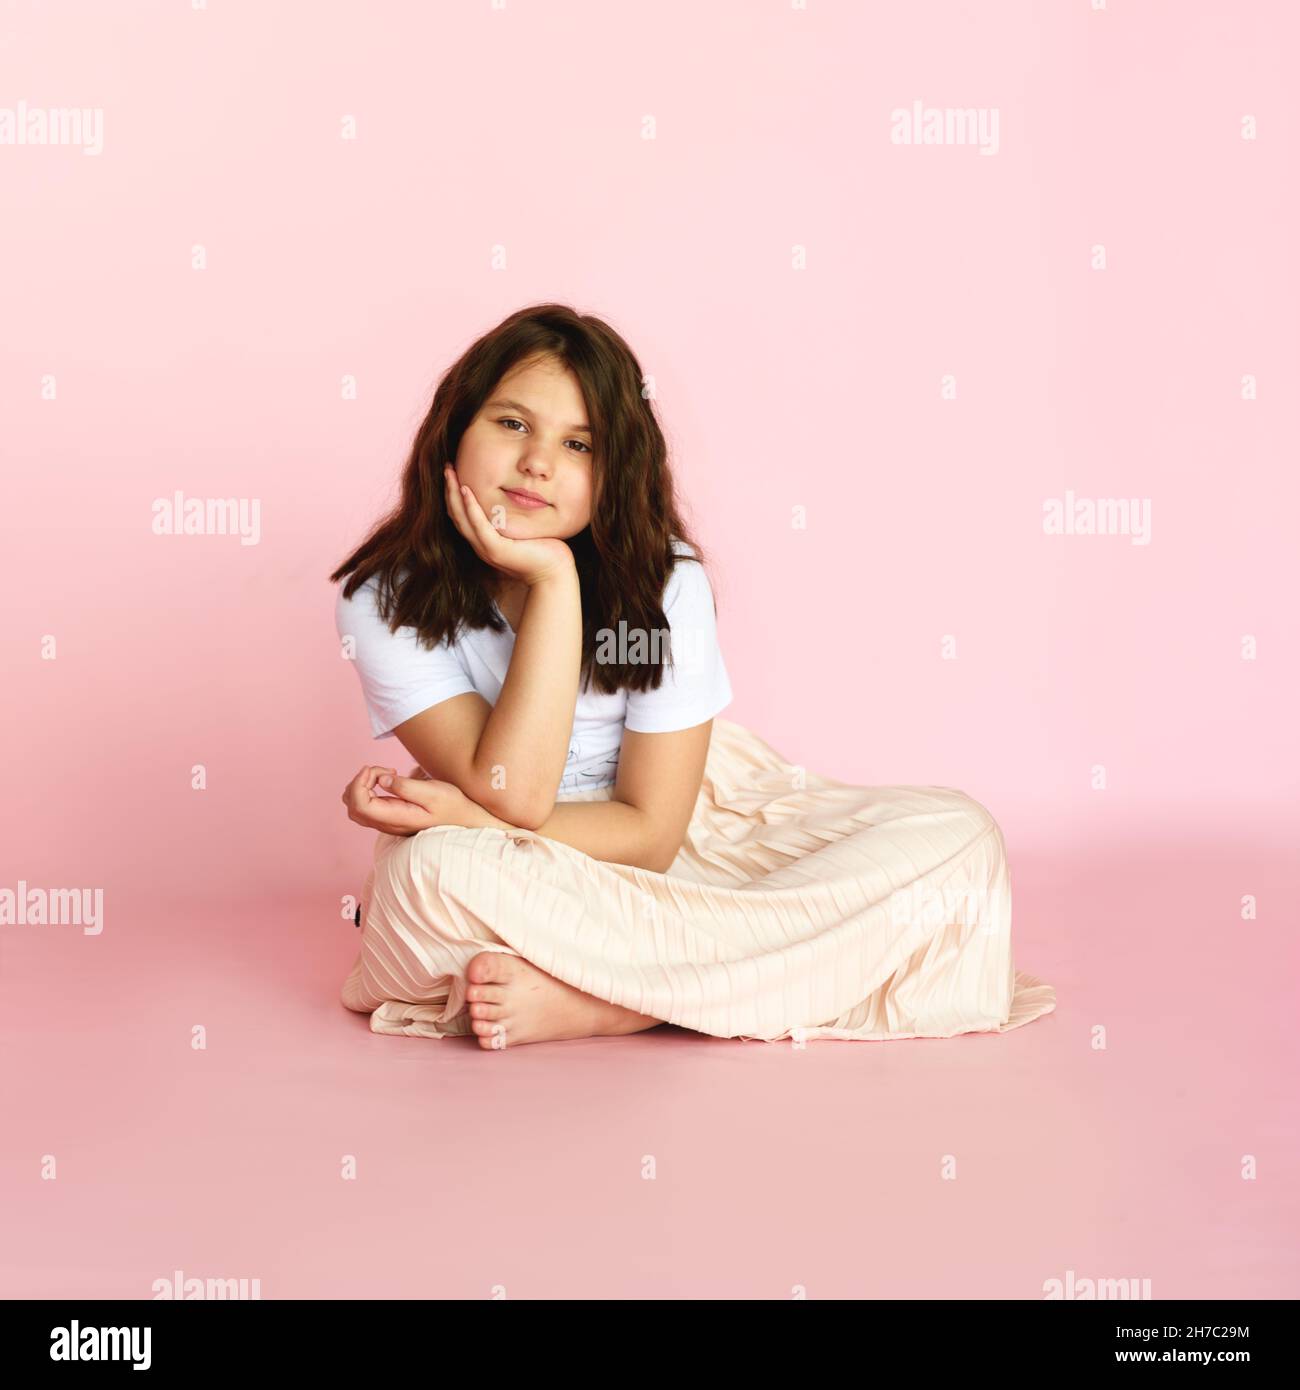 Studio portrait of young girl on pink background. Stock Photo